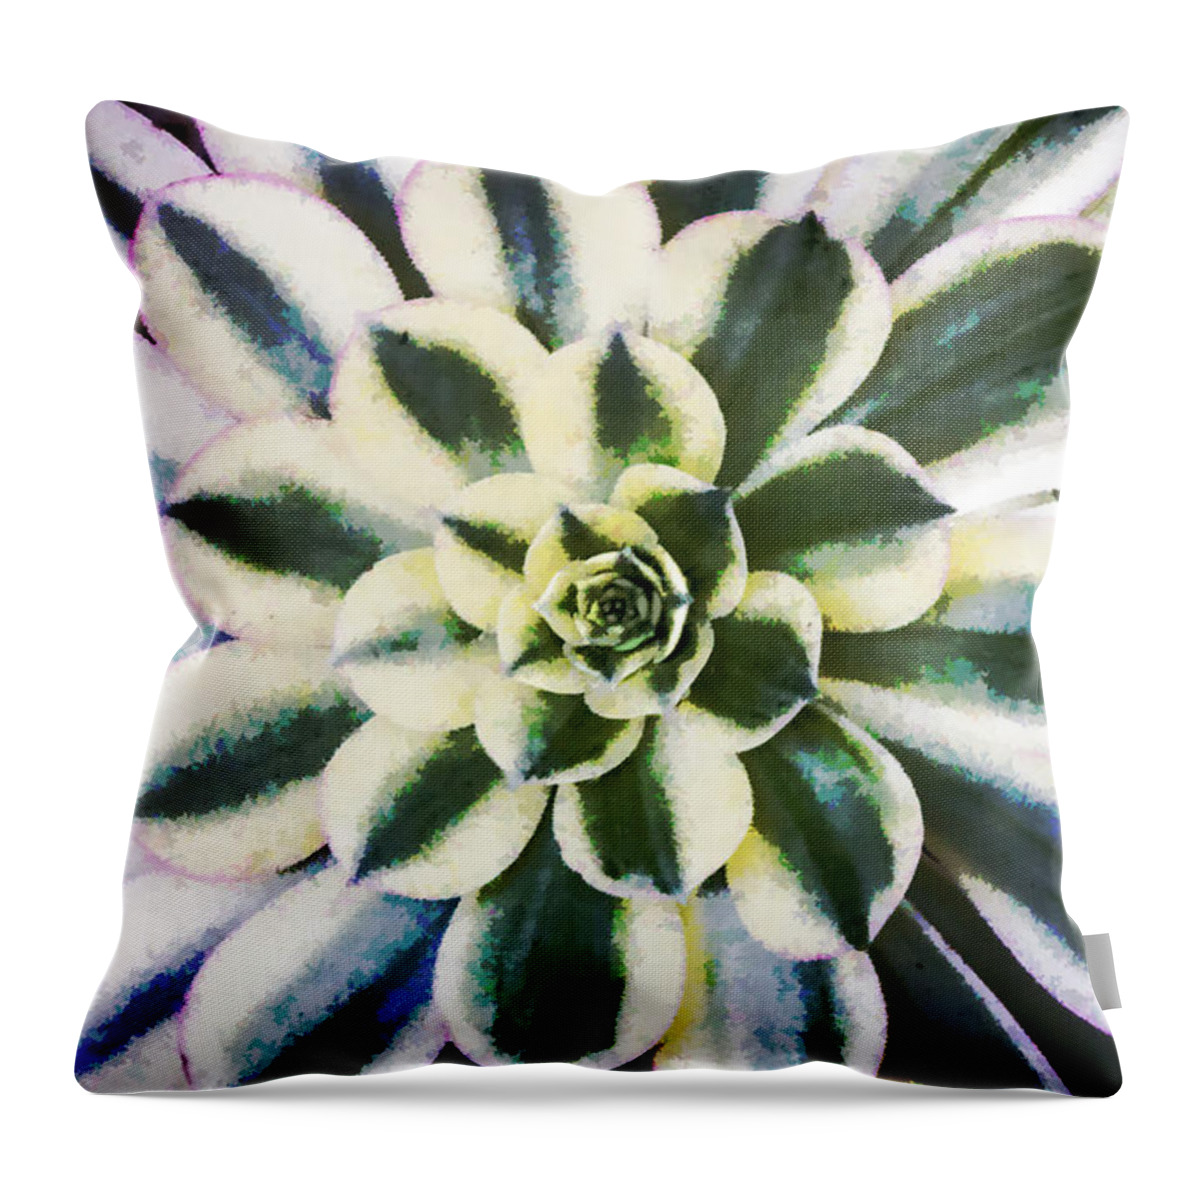 Aeonium Throw Pillow featuring the digital art Aeonium Symmetry by Photographic Art by Russel Ray Photos